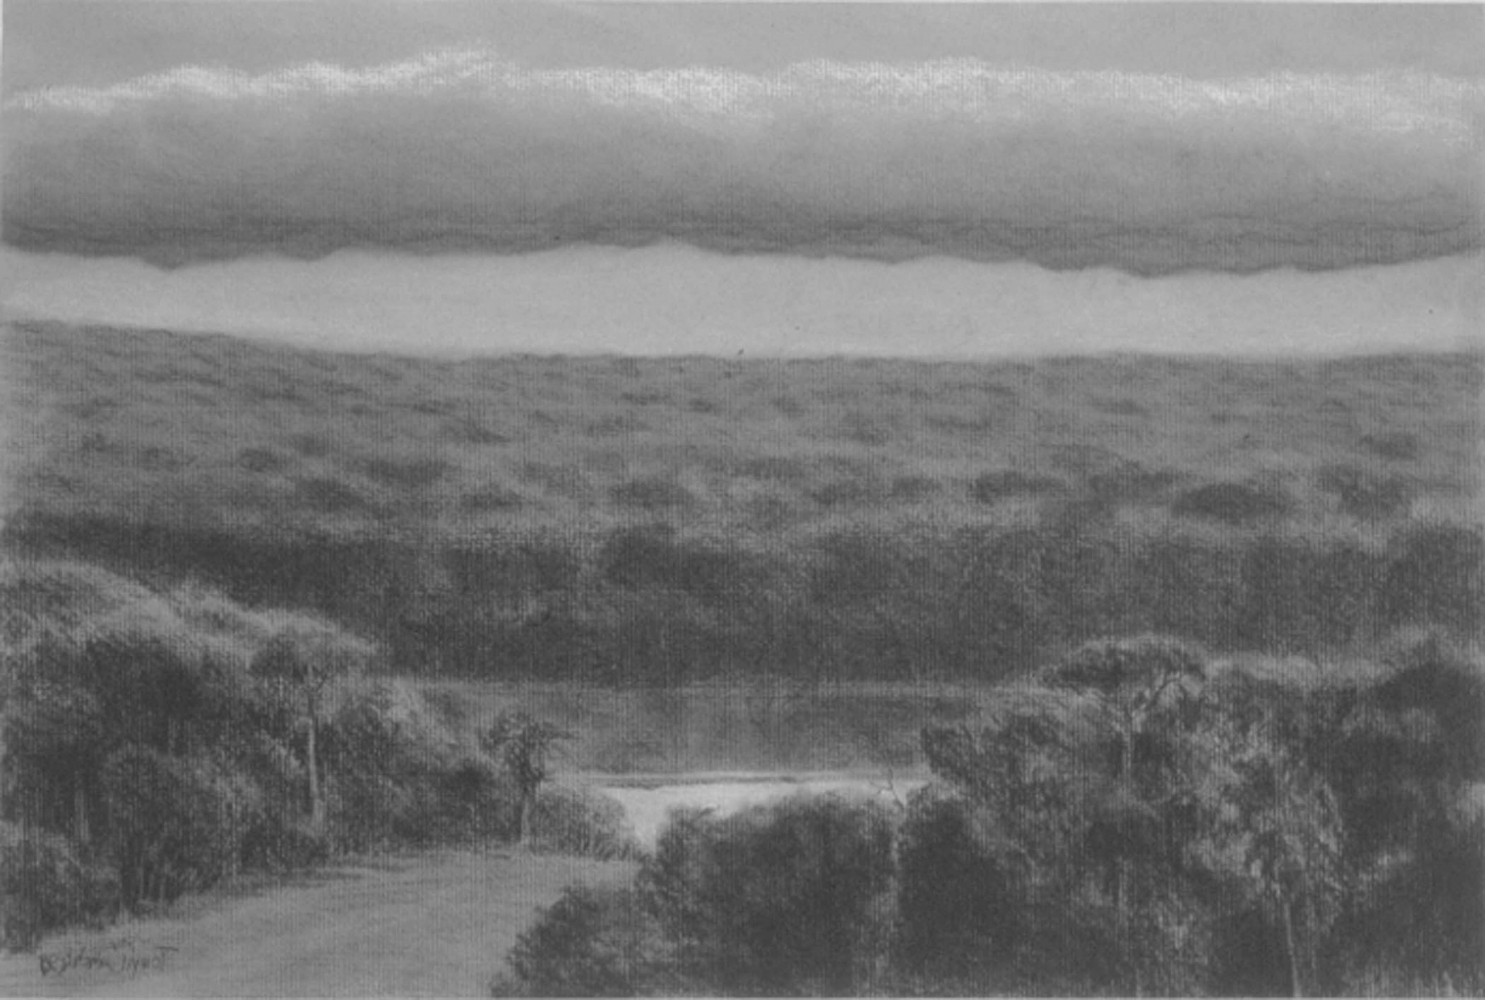 Tom&amp;aacute;s S&amp;aacute;nchez
Sin t&amp;iacute;tulo (no. 4), 1998

pencil on paper

11 1/8 x 17 1/2 in. / 28.3 x 44.5 cm